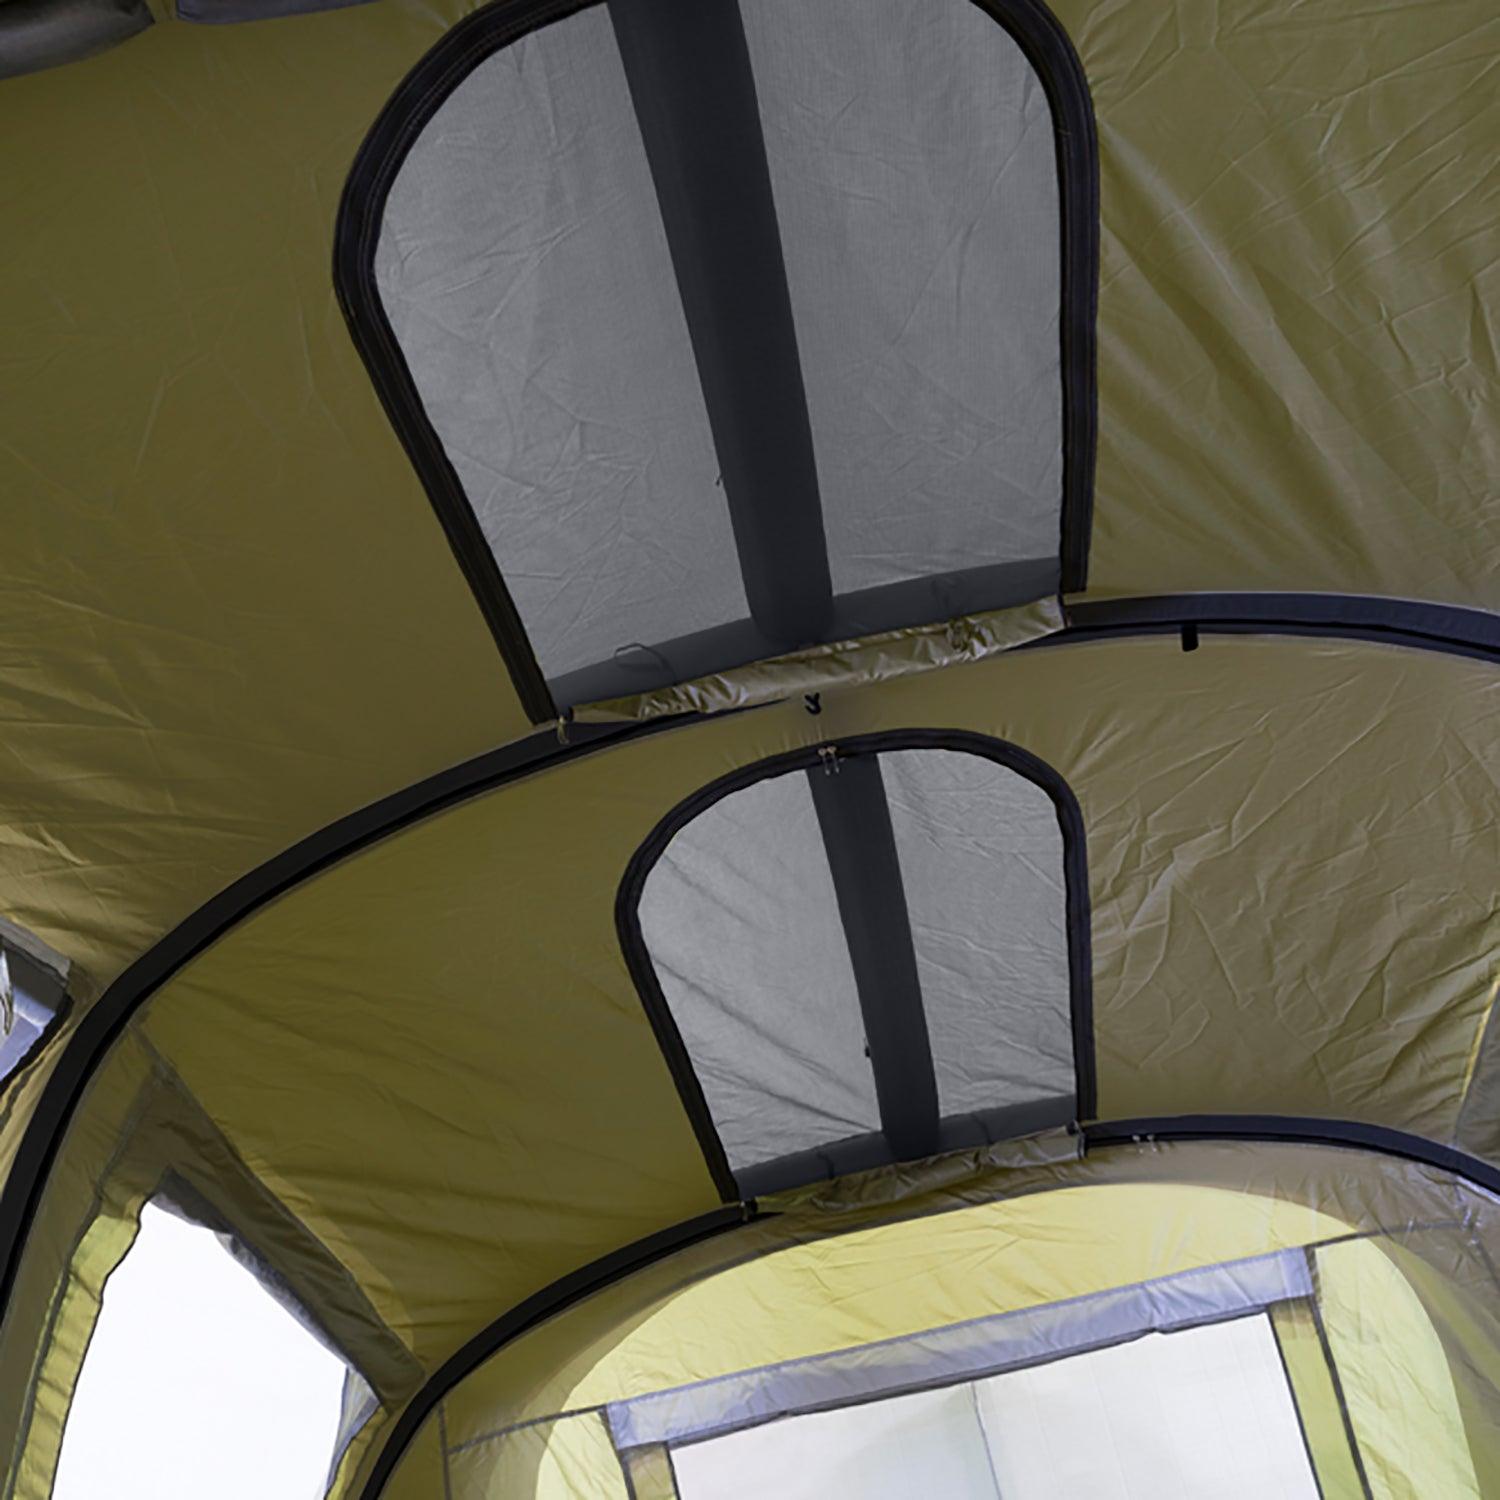 Air-Volution AT-6 Tent Green  Shelters Darche- Adventure Imports